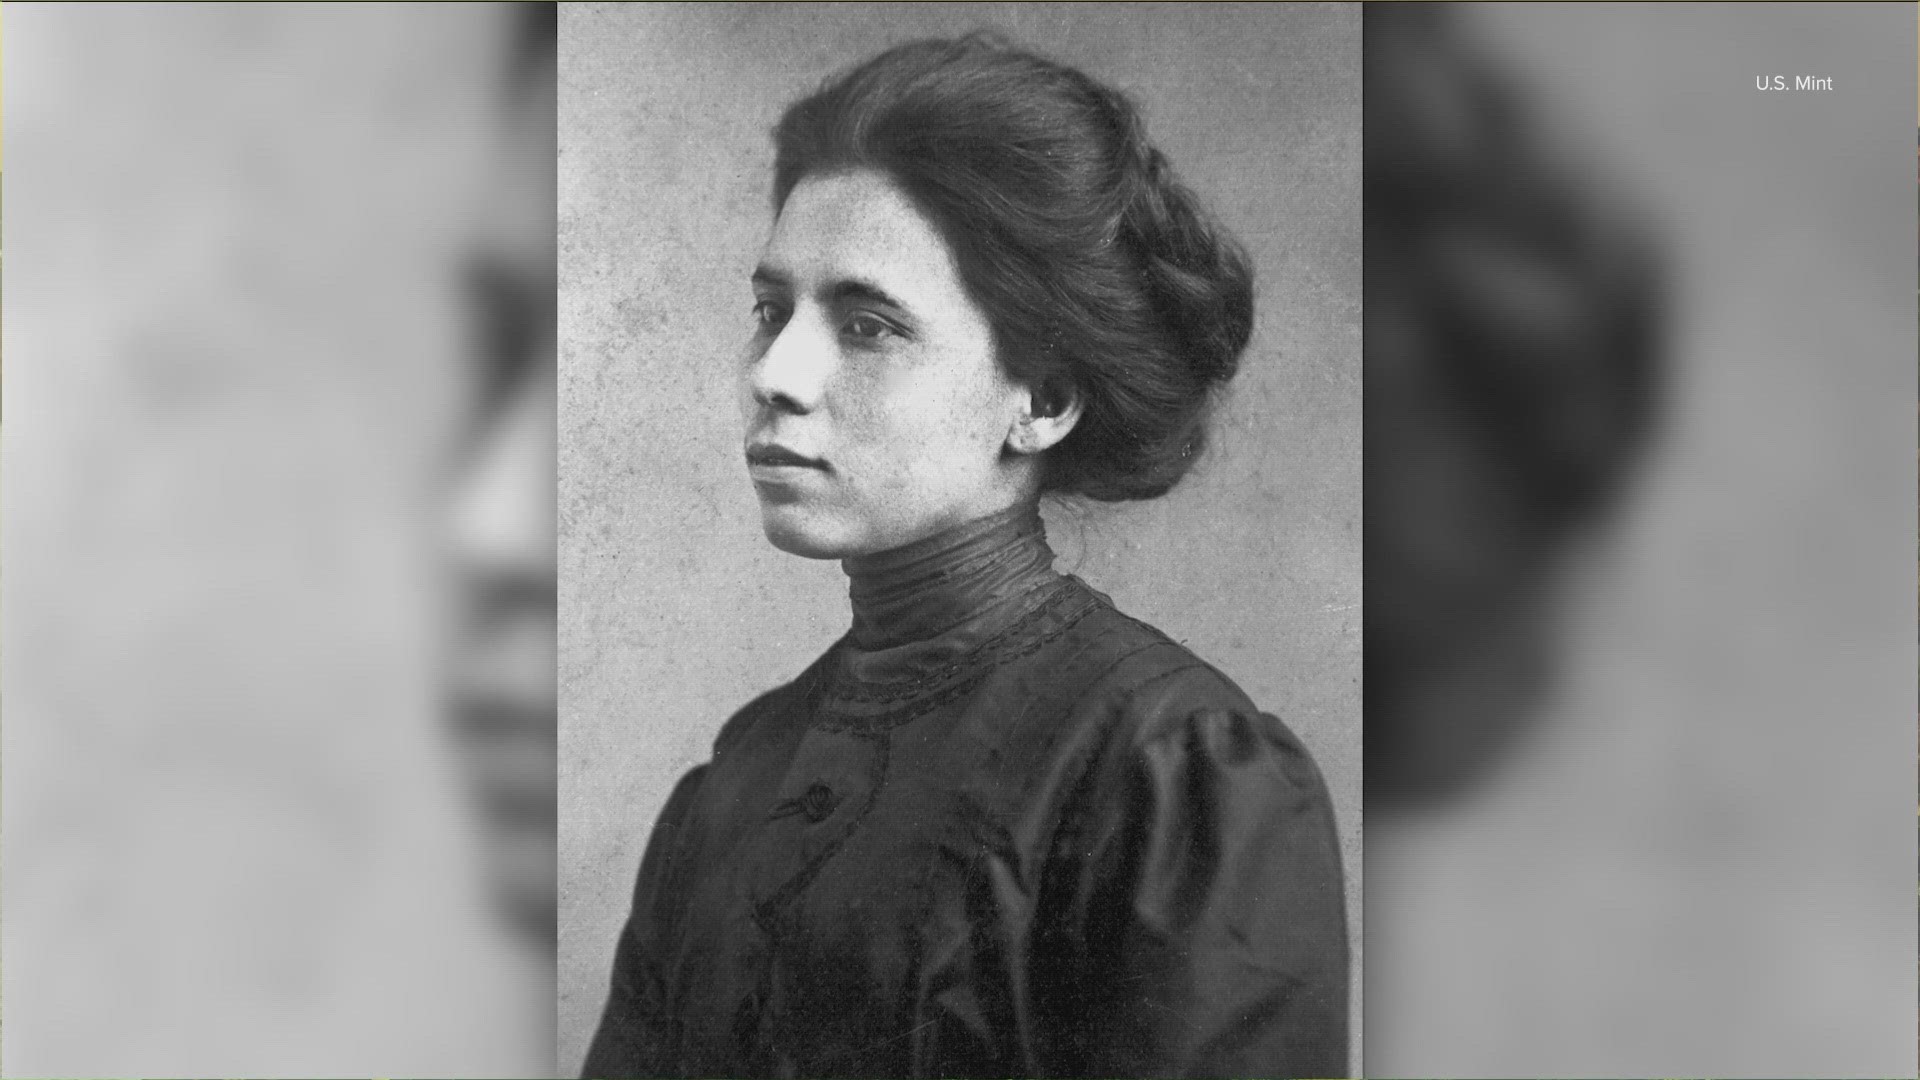 This Hispanic Heritage Month, we're honoring the contributions and influence of Hispanic Americans. And there's no greater advocate than Jovita Idar.